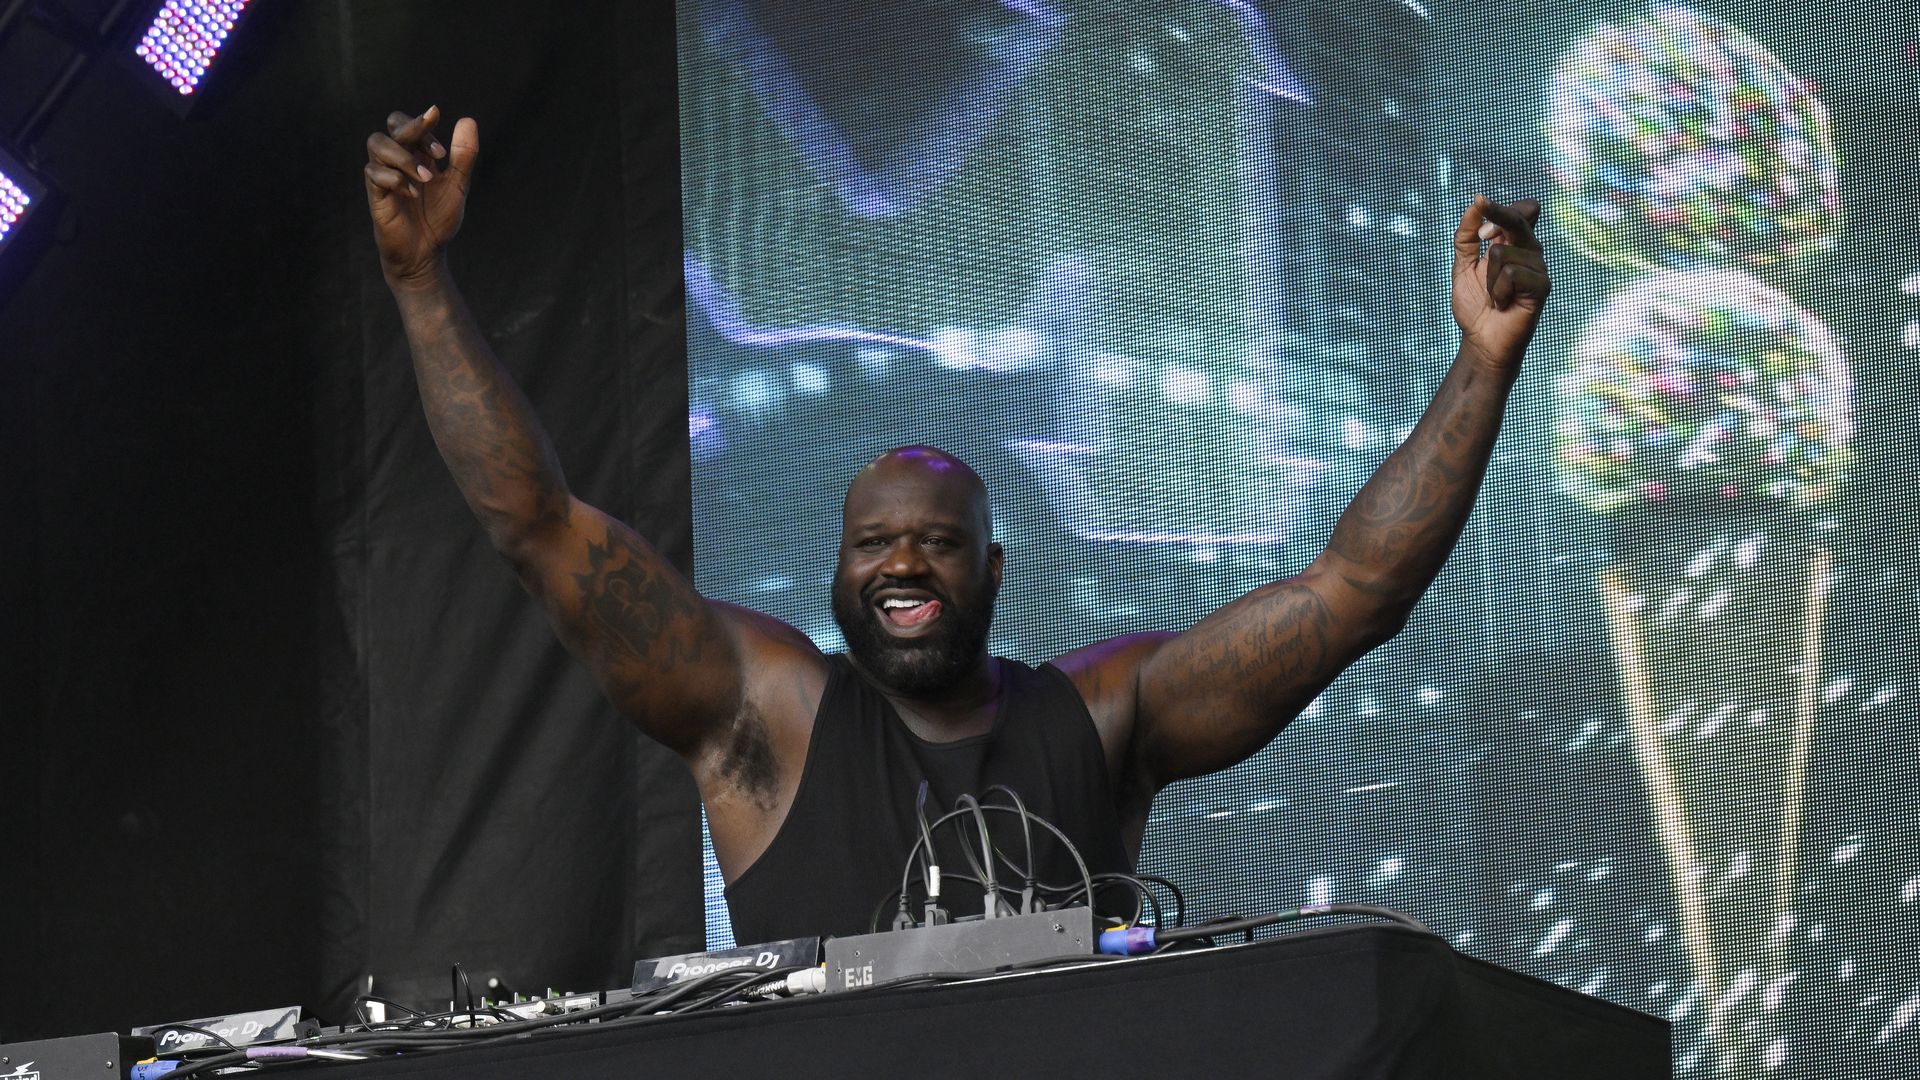 Shaquille O'Neill sticks out his tongue and raises both hands in the air. 